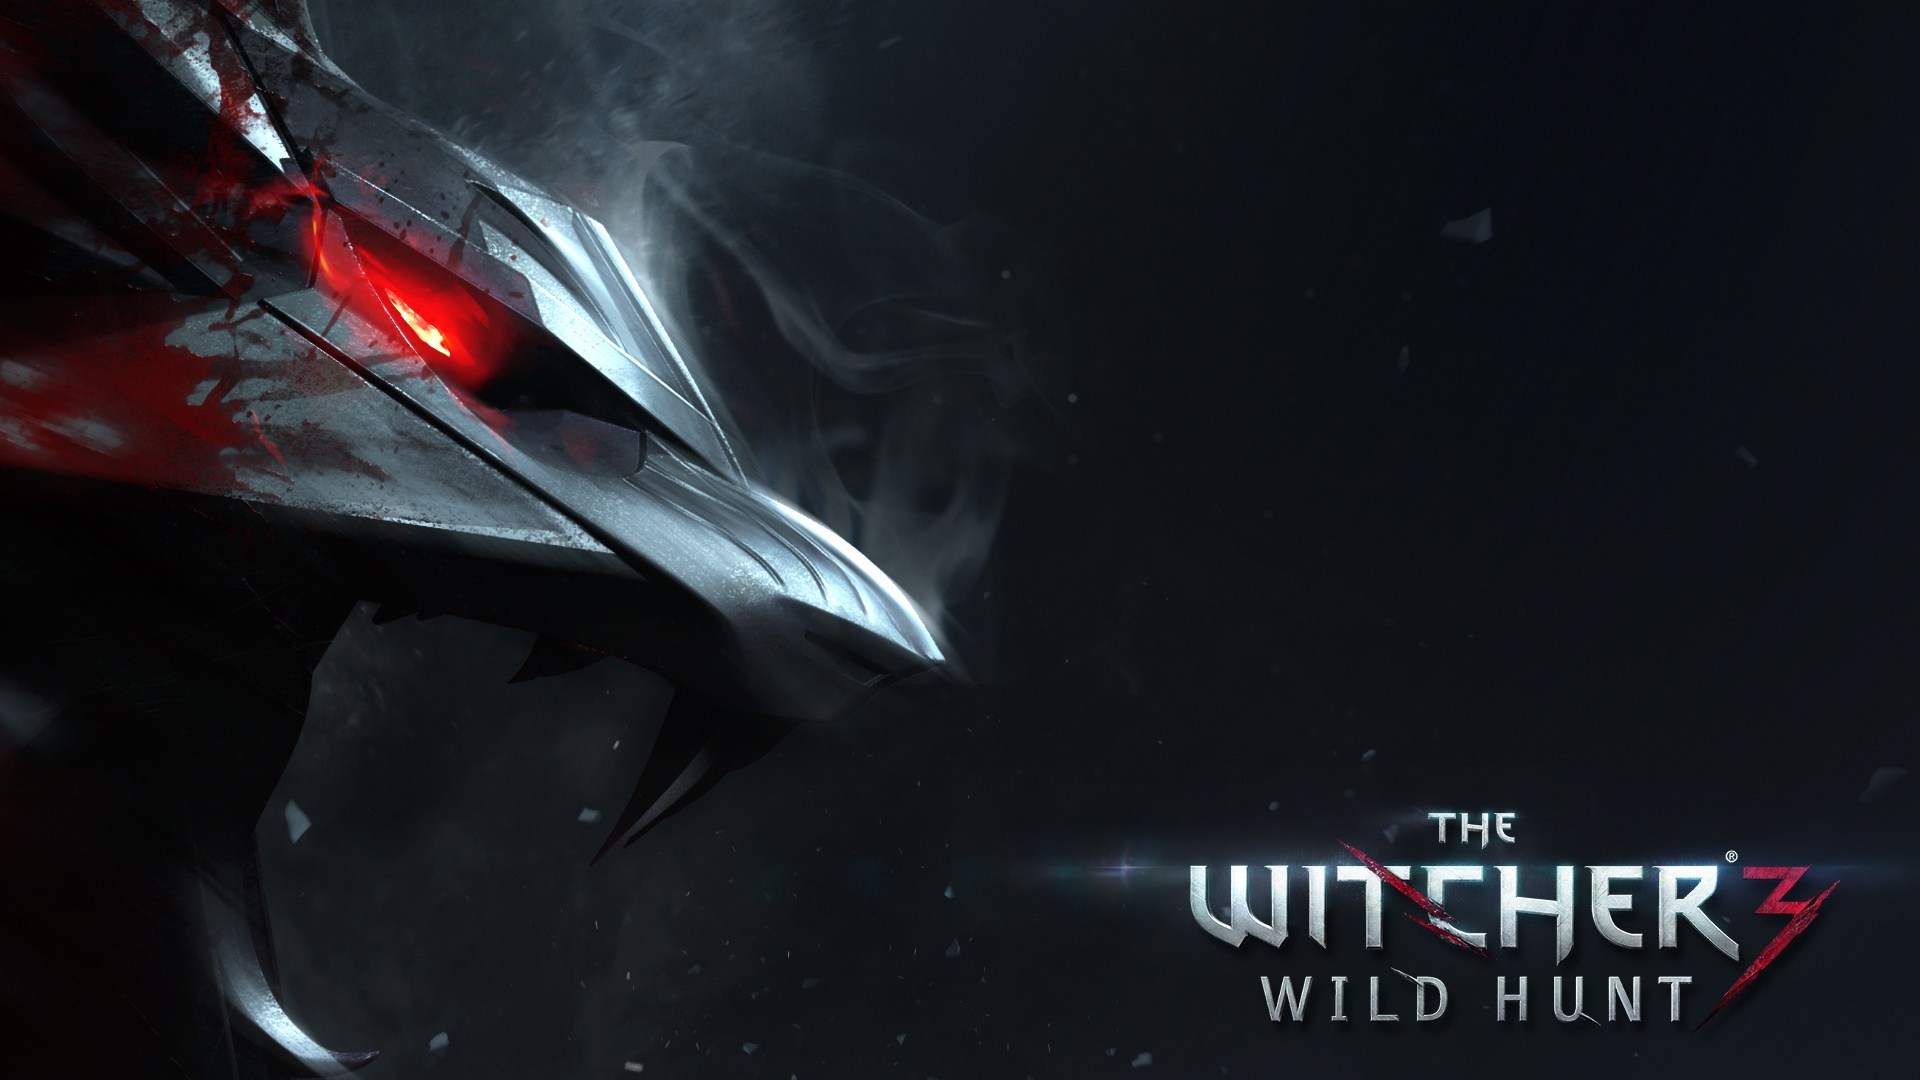 The Witcher Wild Hunt Wallpaper HD